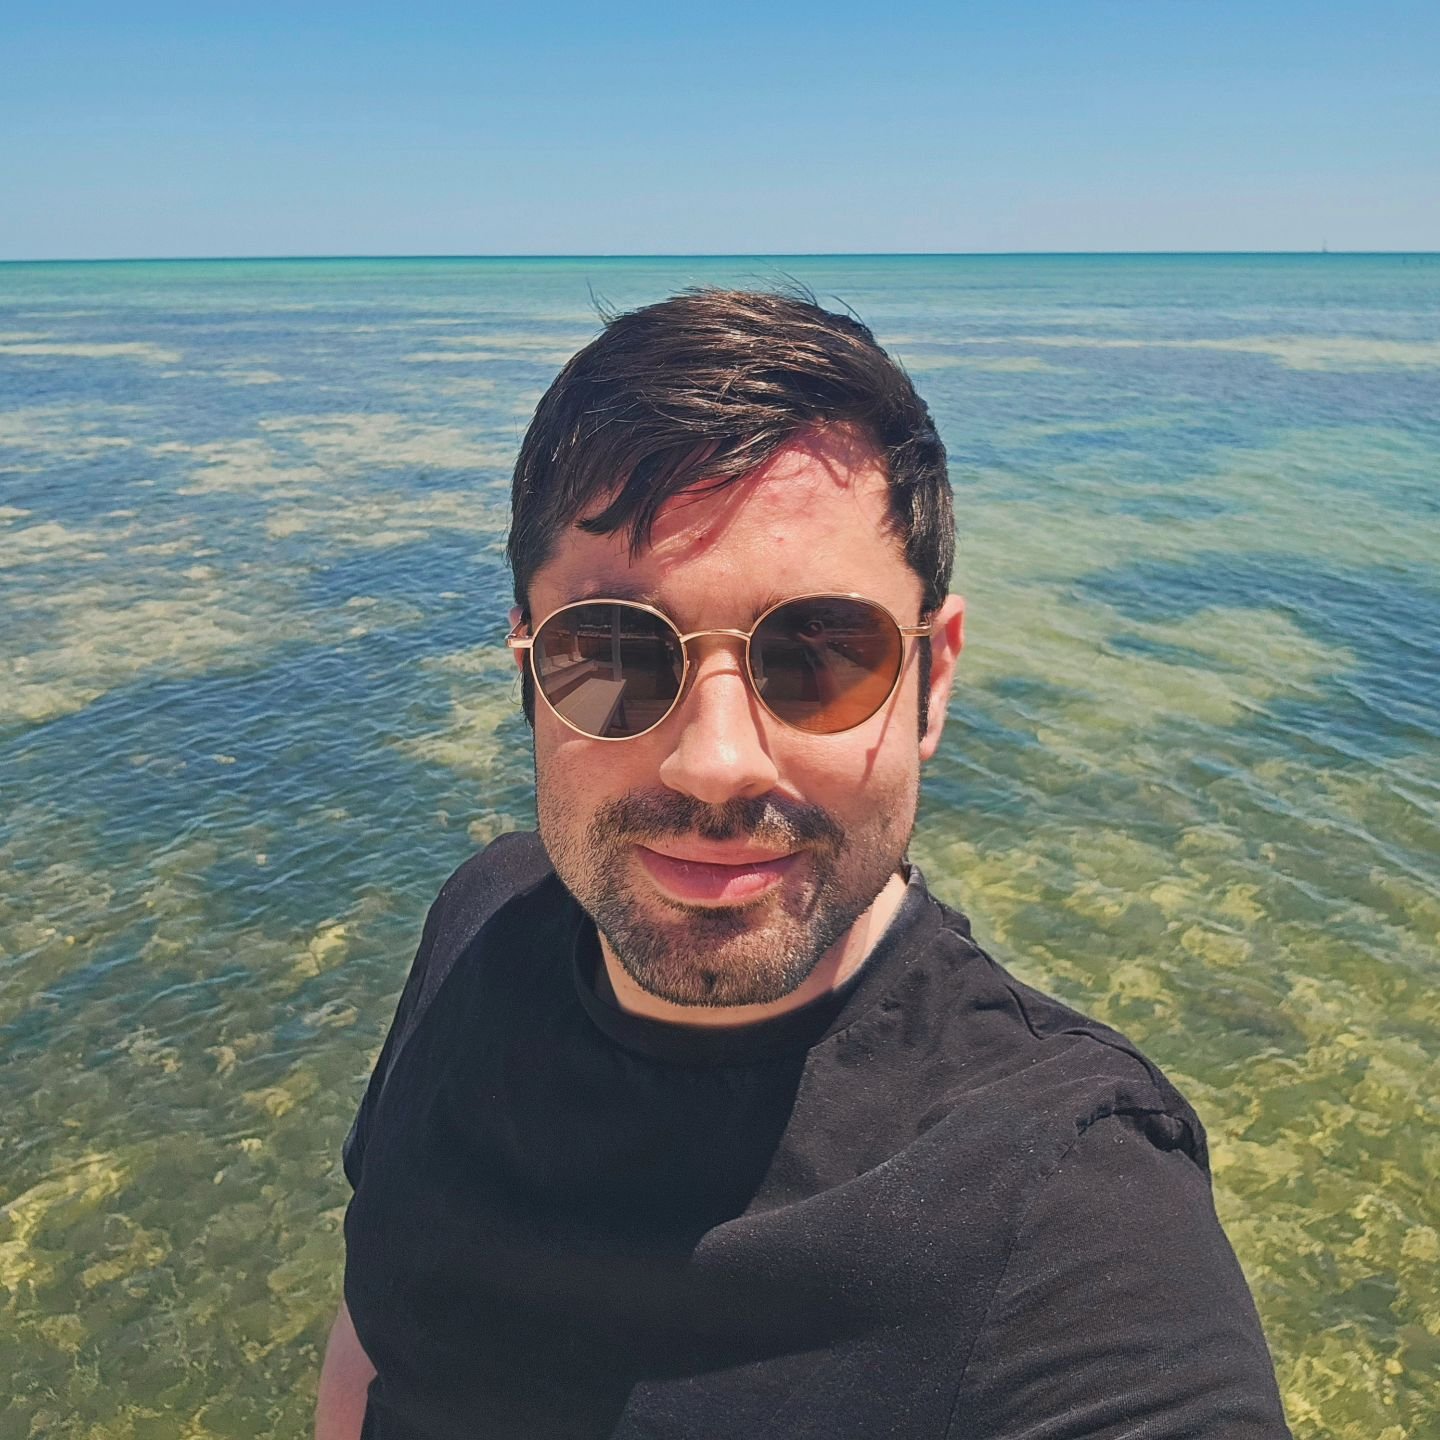 The Florida Keys were beyond stunning (and driving was the right thing to do). Islamorada in particular was so beautiful, quiet and charming. Also I made it though the trip without getting sunburned because I'm grown up and responsible x

Love you by